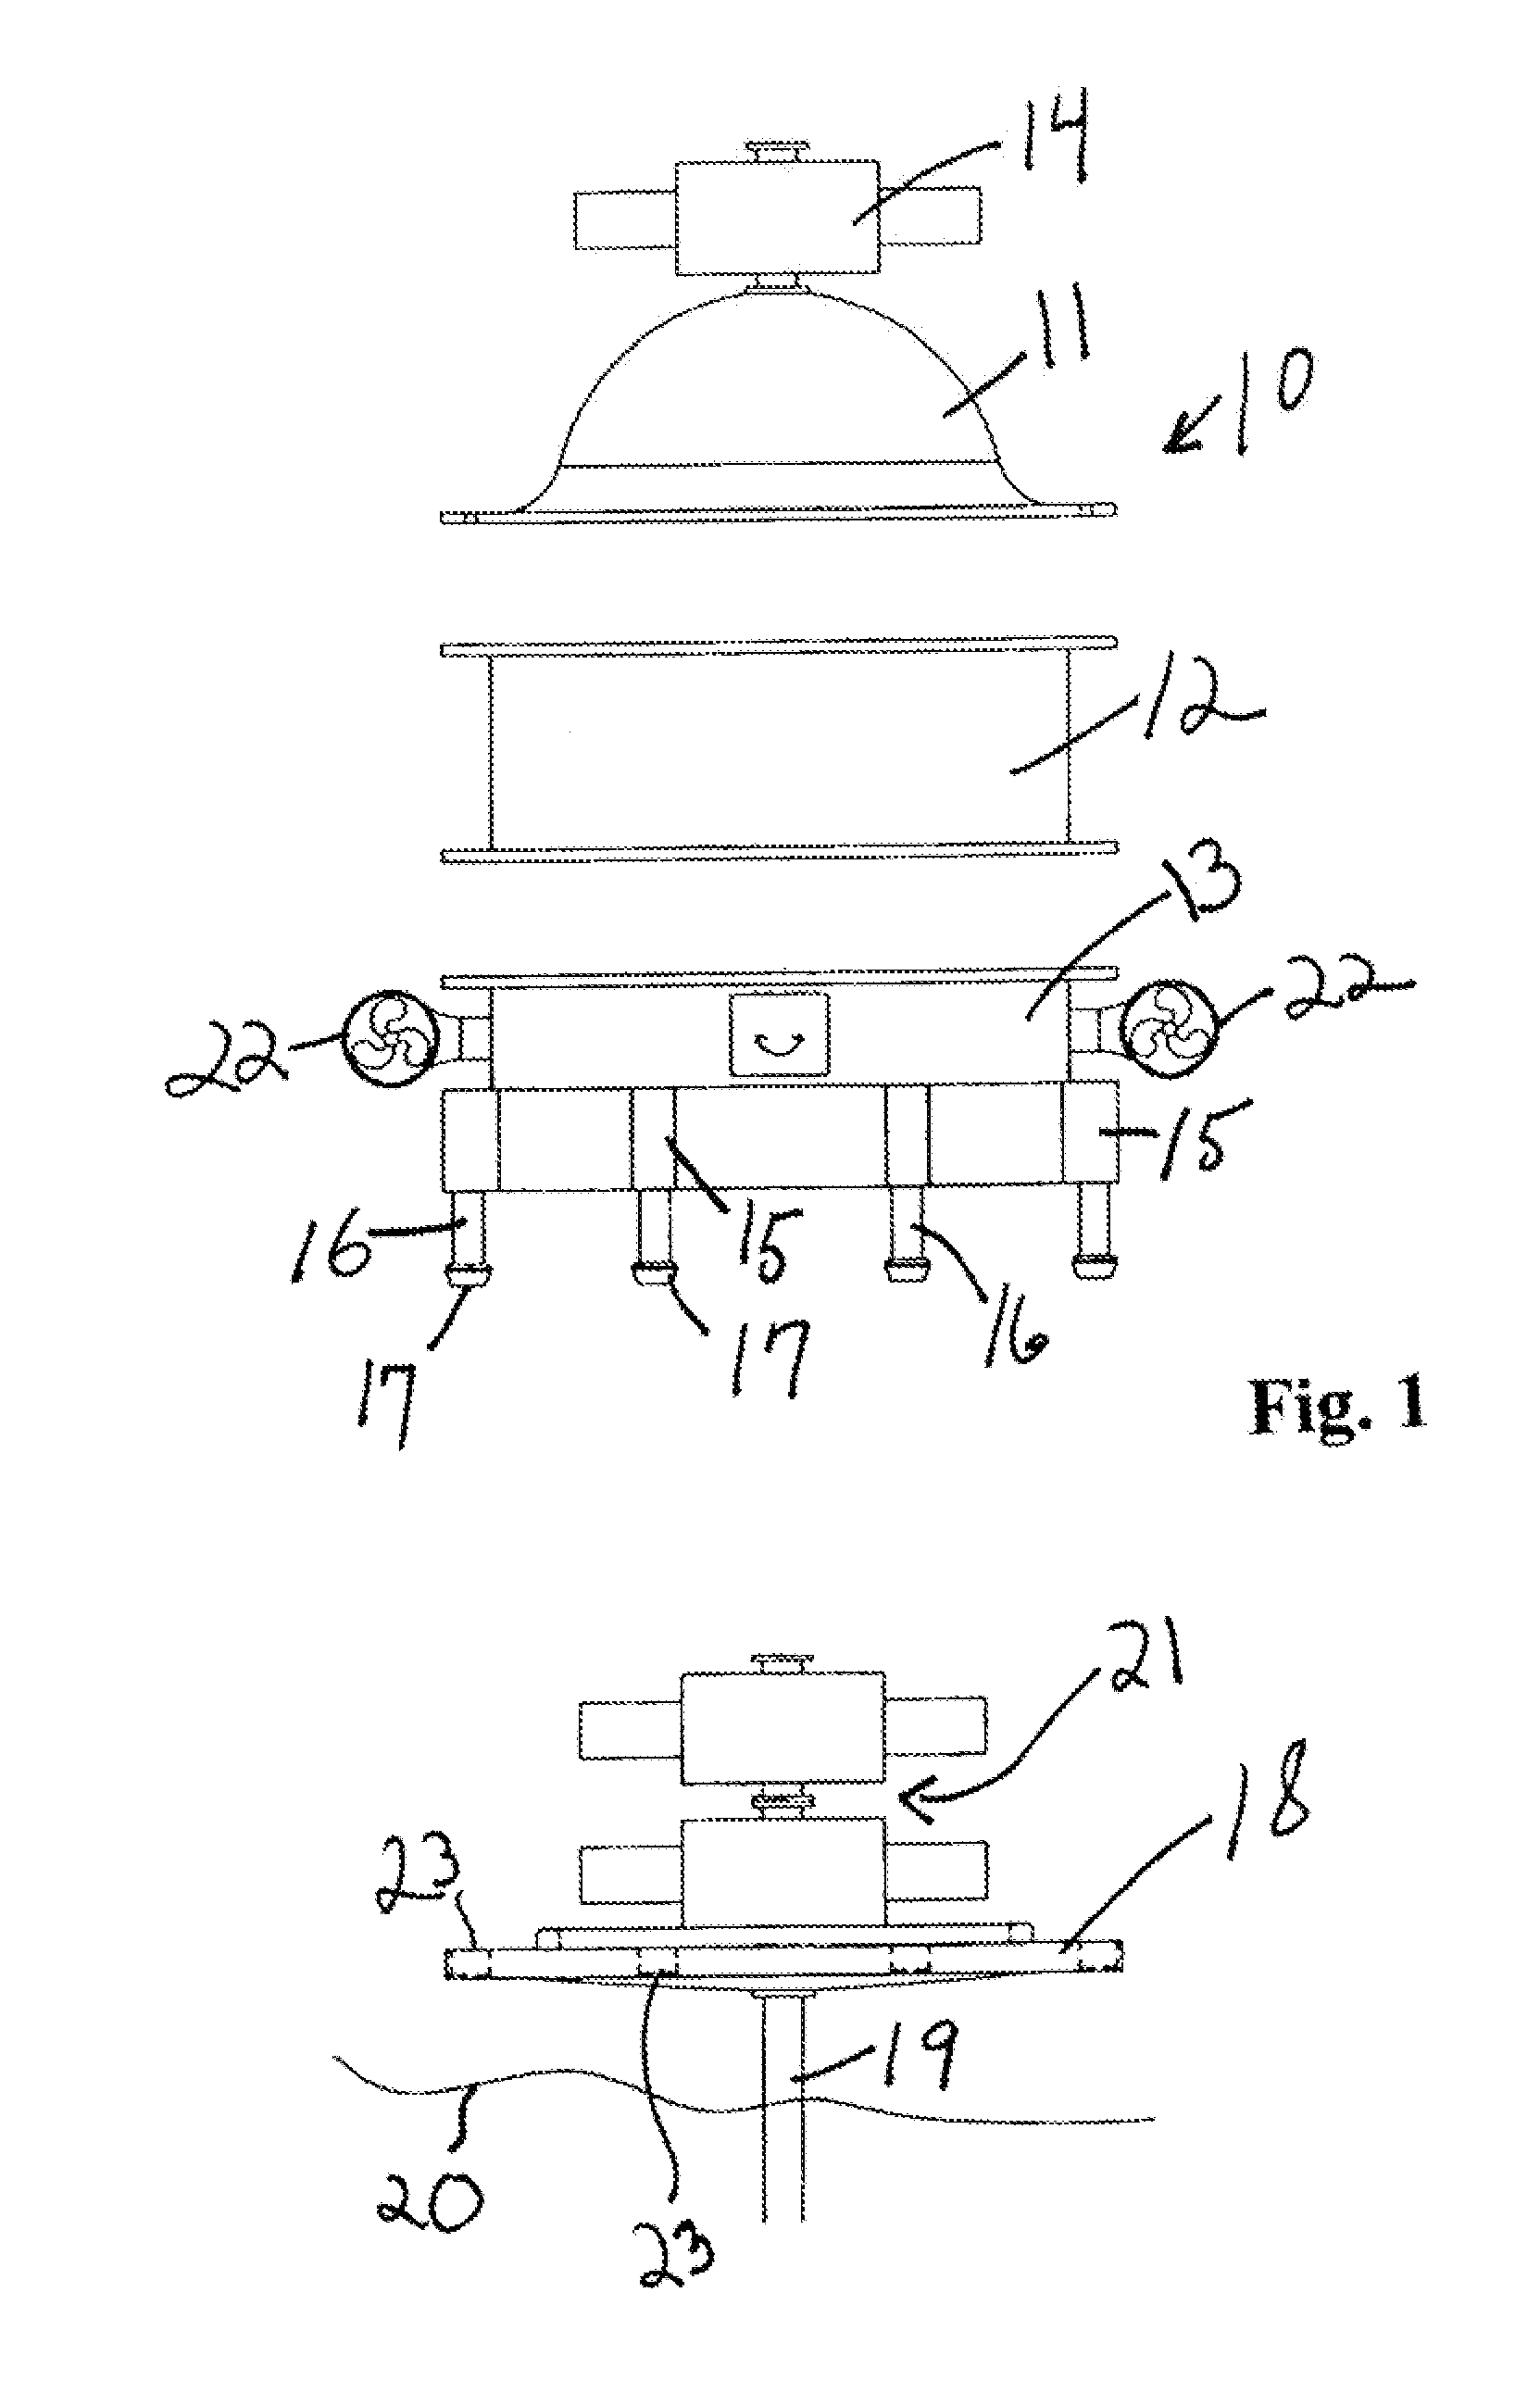 Apparatus and method for isolating and securing an underwater oil wellhead and blowout preventer